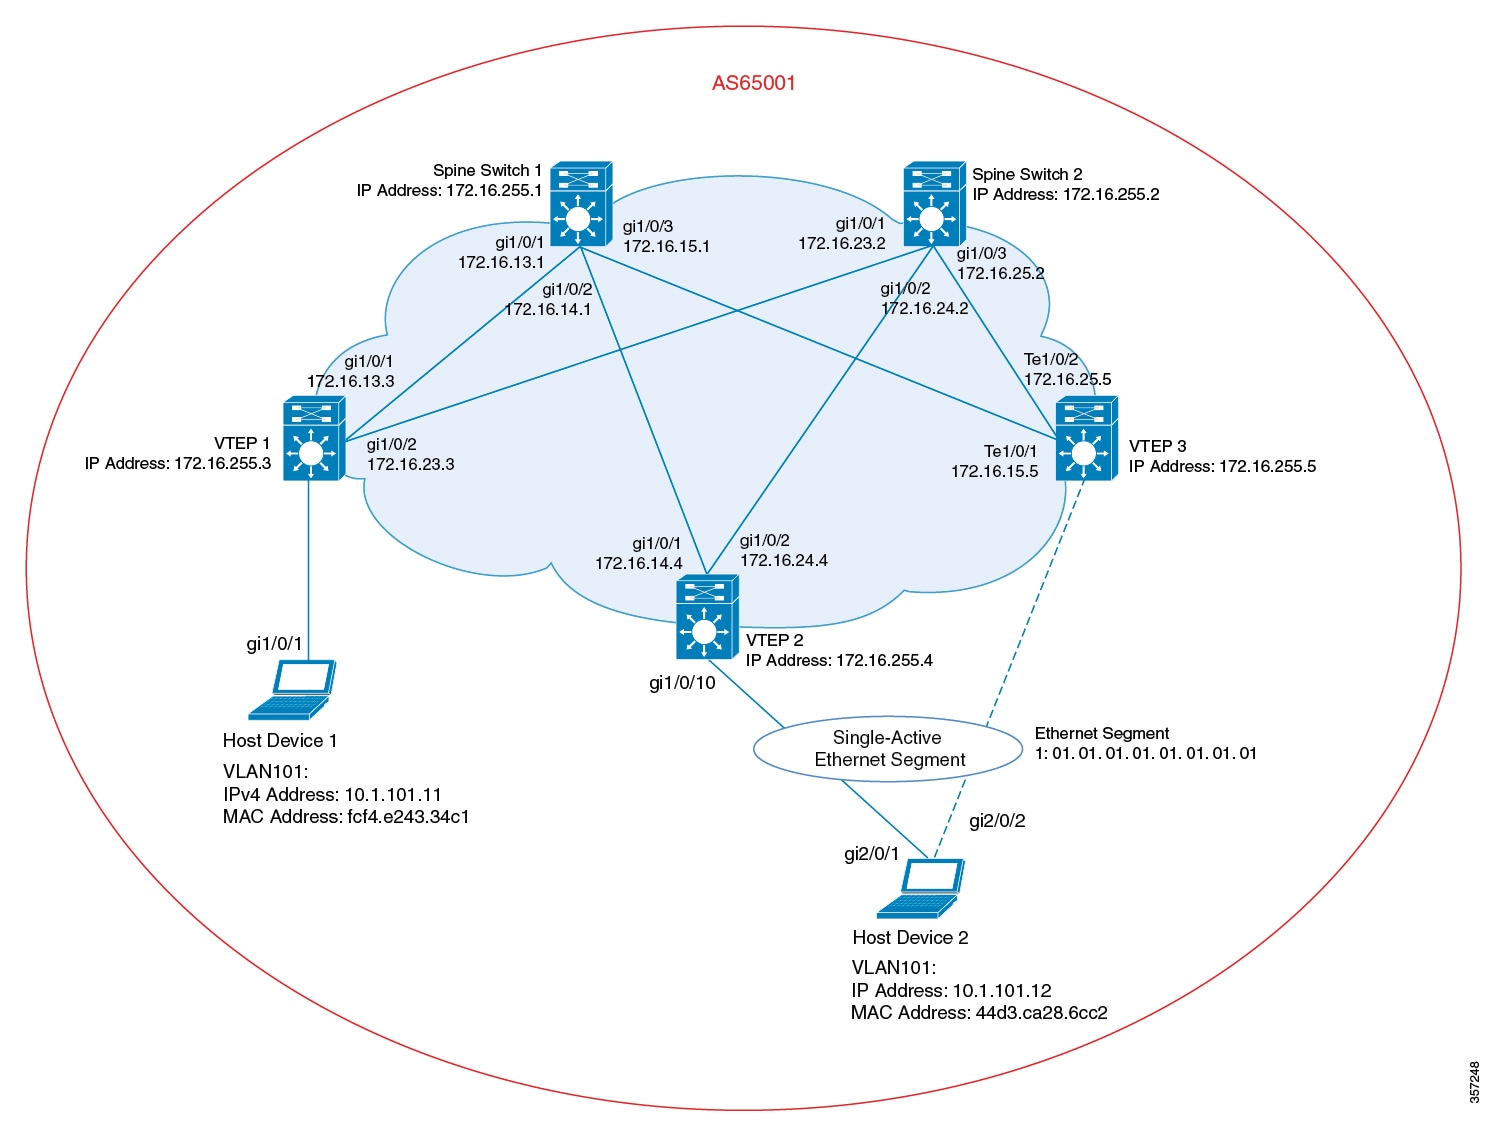 Sample topology for dual-homing with single-active redundancy in a BGP EVPN VXLAN fabric